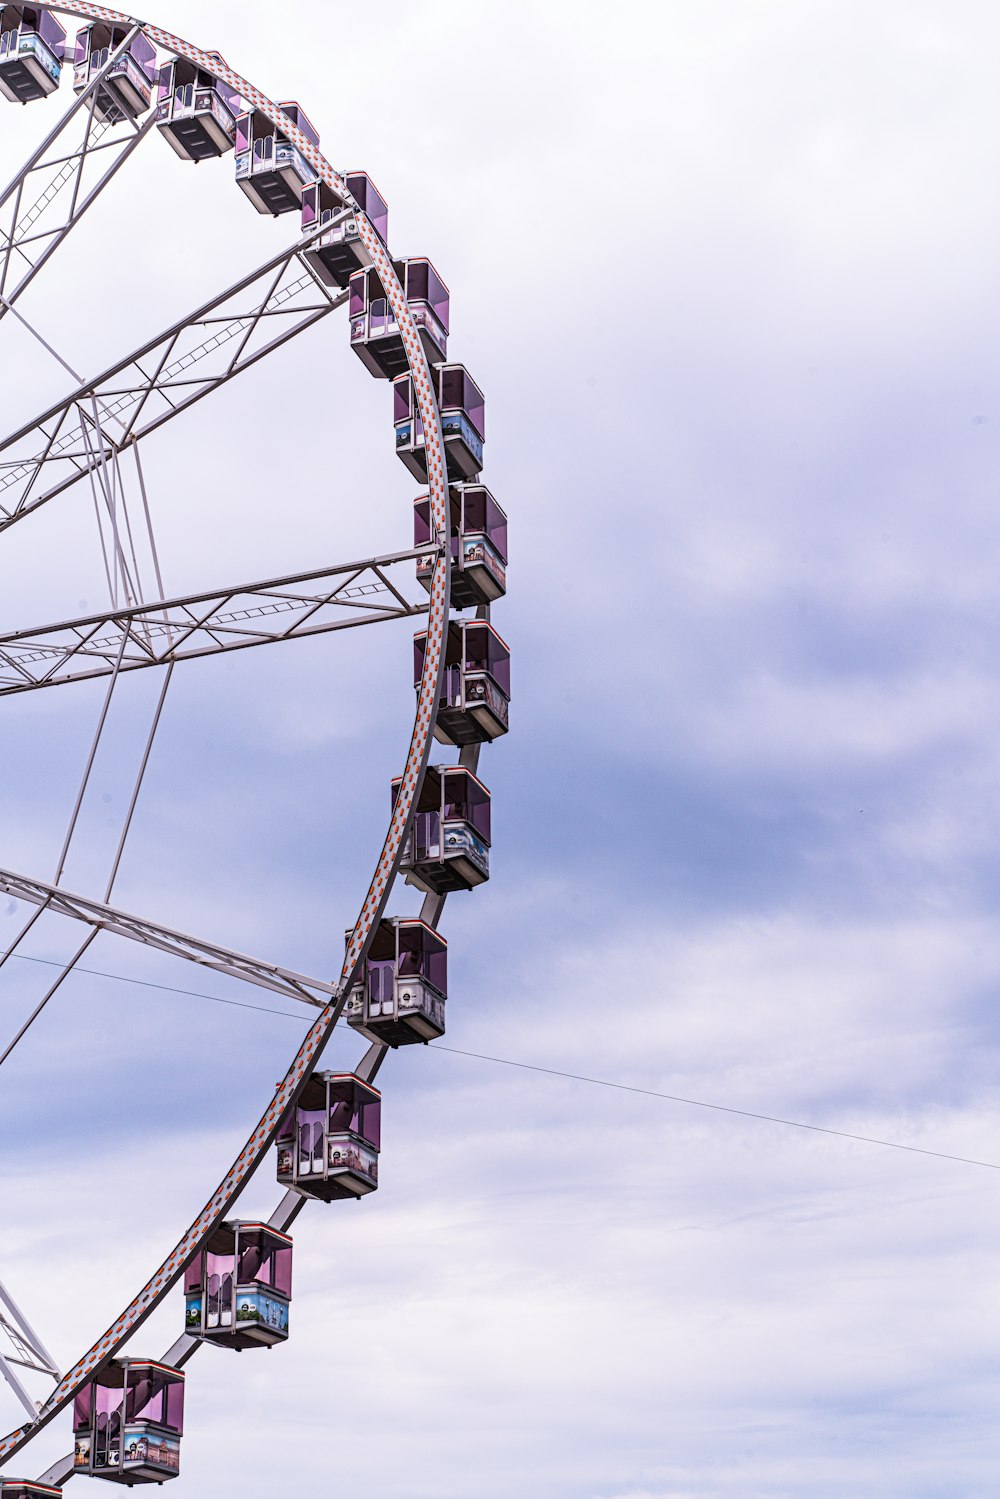 a ferris wheel with purple seats on a cloudy day